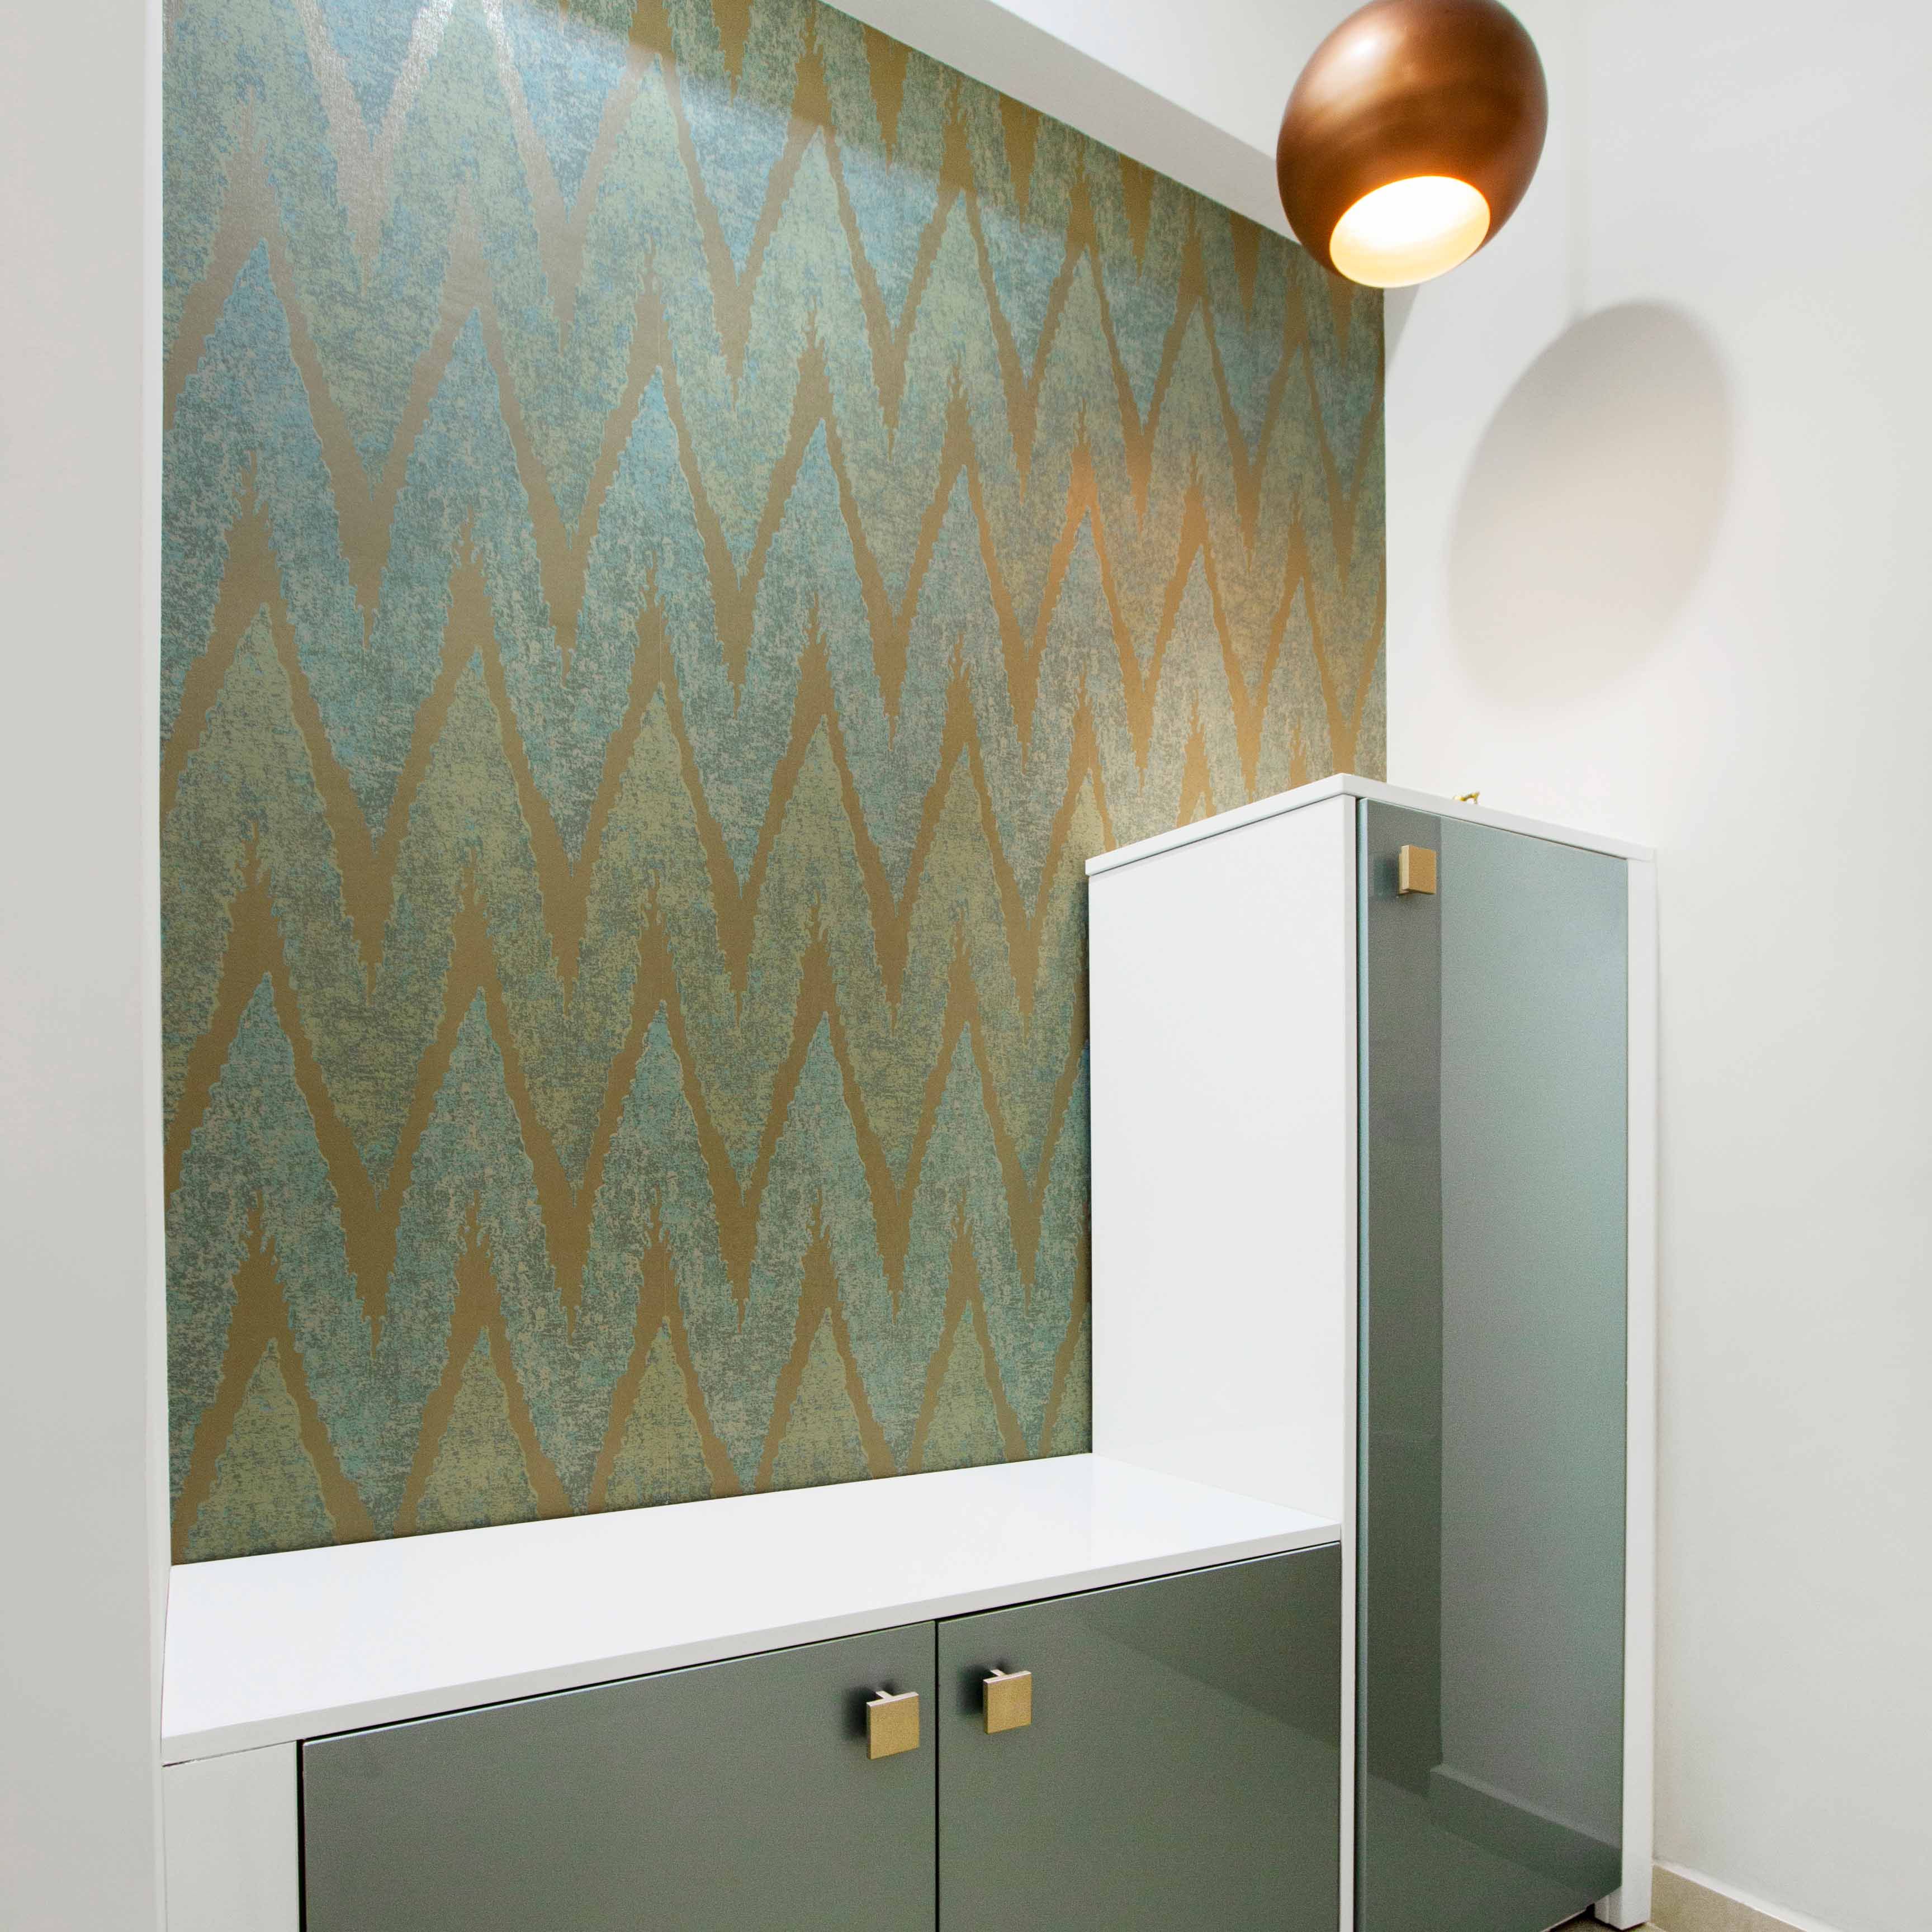 Contemporary Foyer Design With Metallic Blue Wallpaper And Gold Zig-Zag Lines